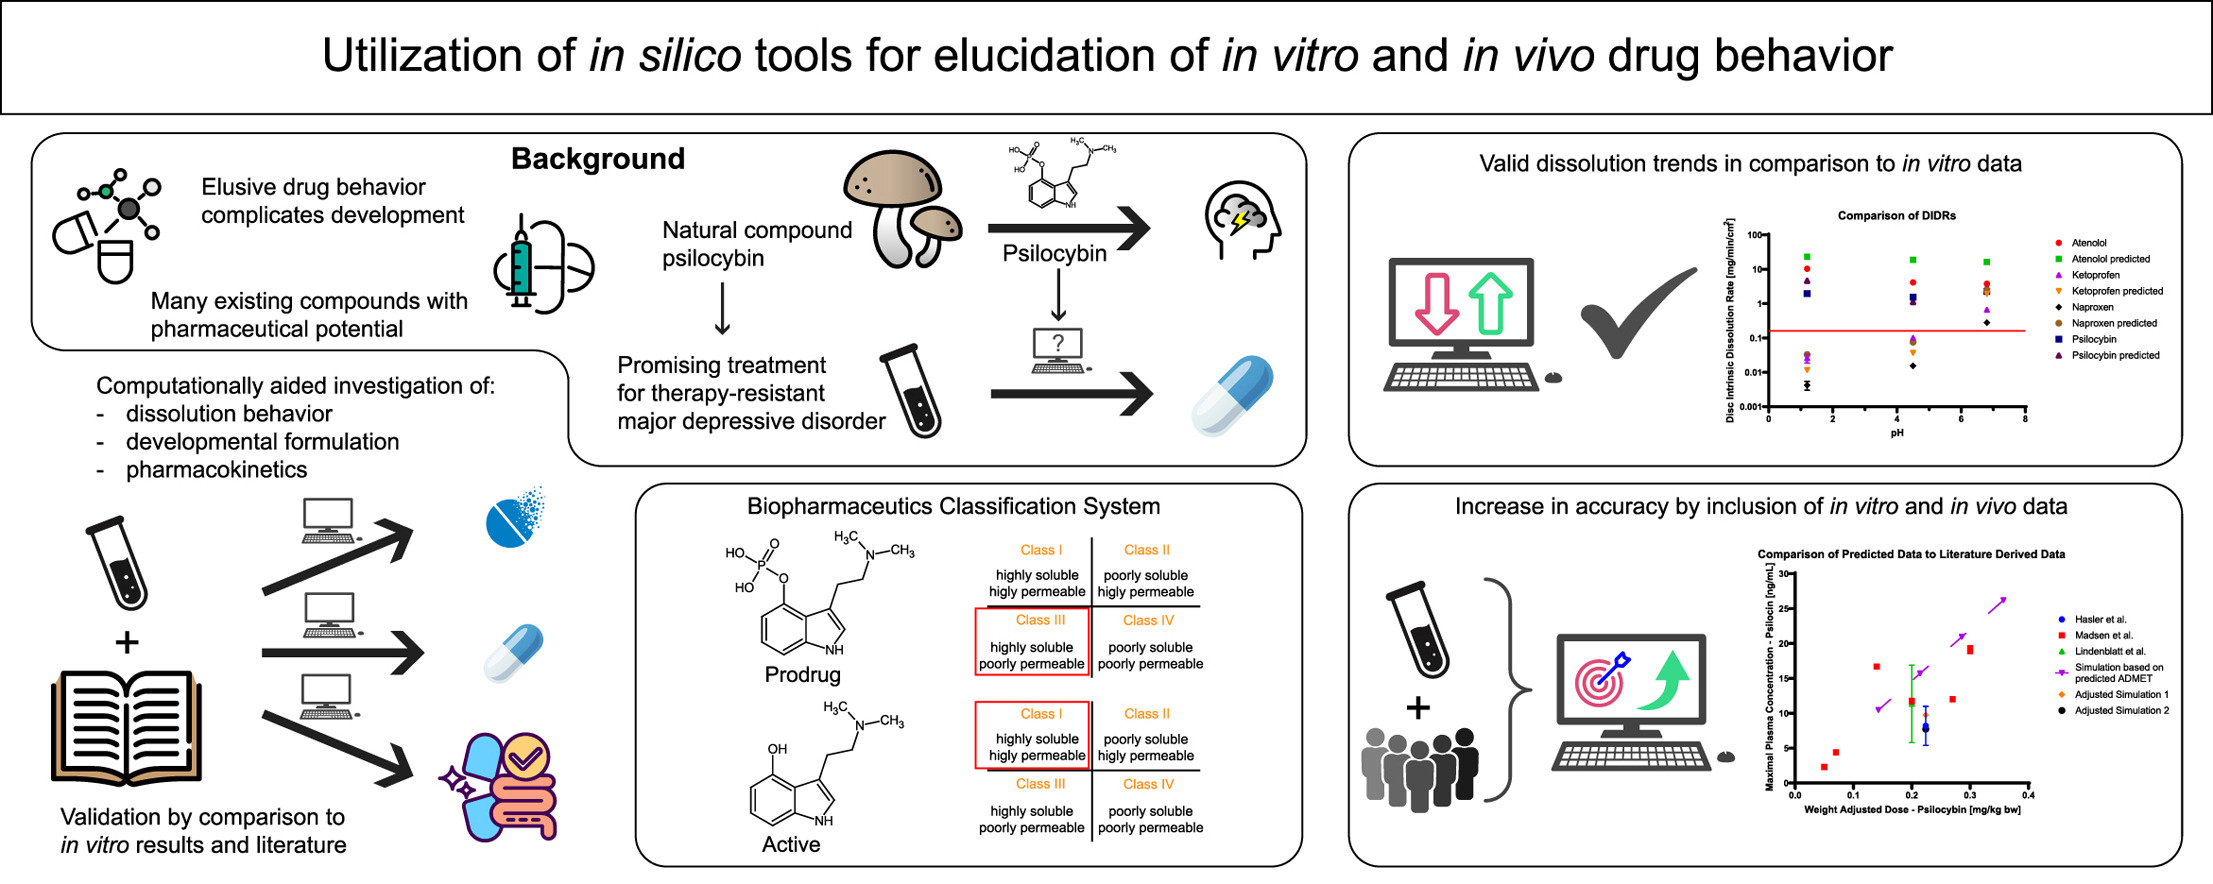 Assessing the utility of in silico tools in early drug development